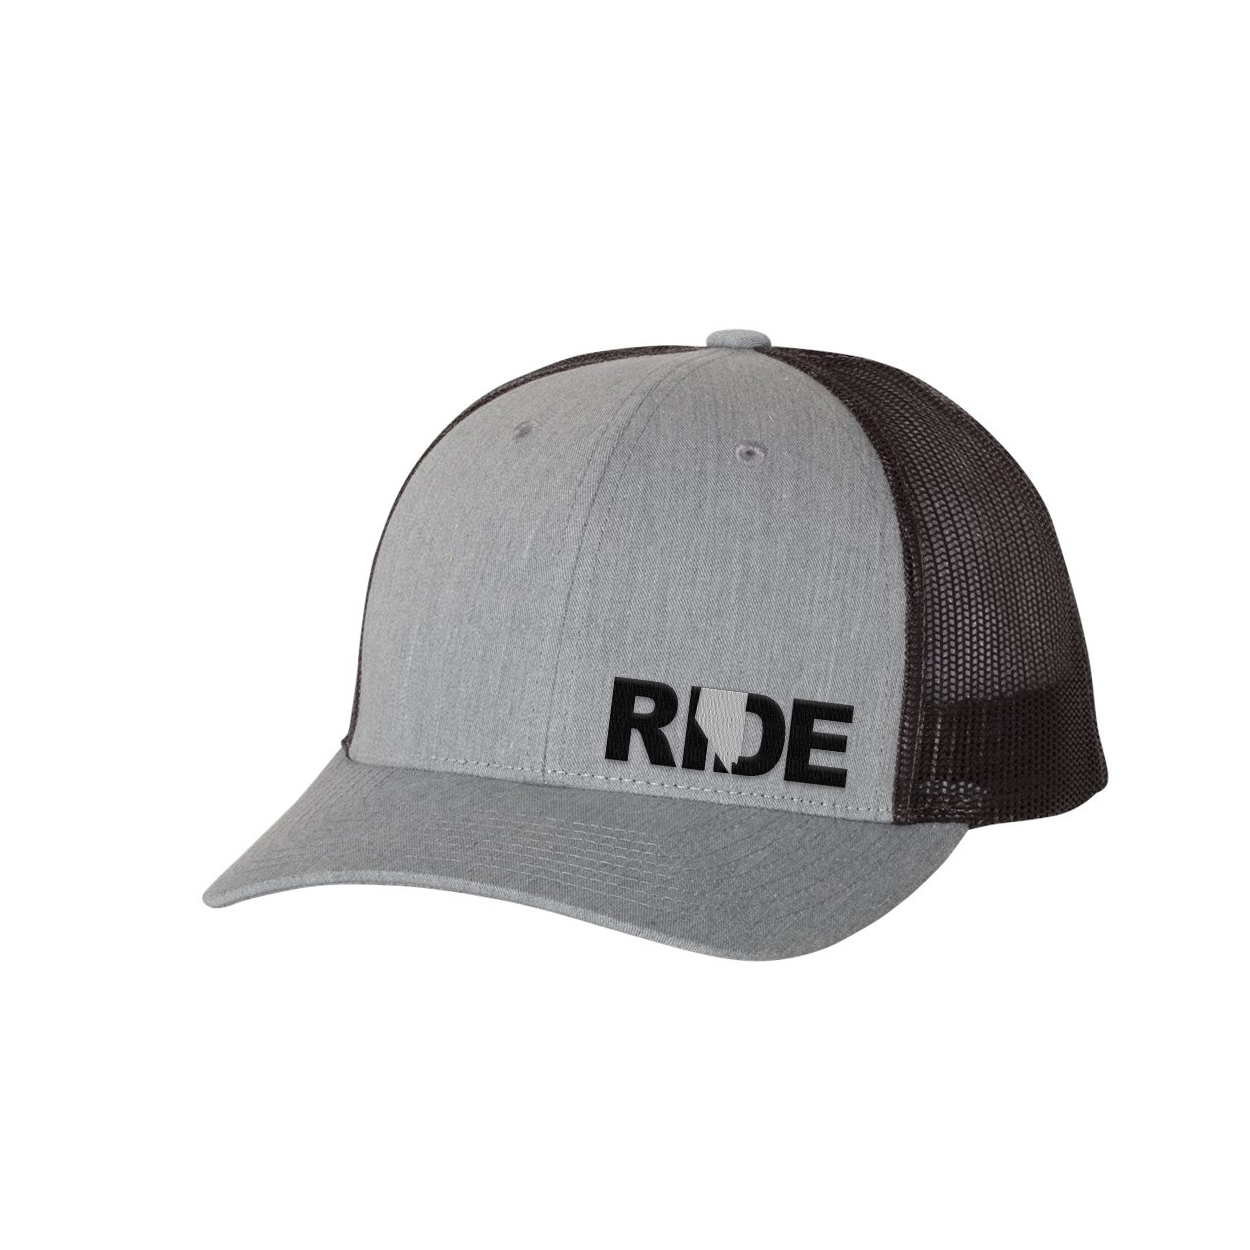 Ride Nevada Night Out Embroidered Snapback Trucker Hat Heather Gray/Black